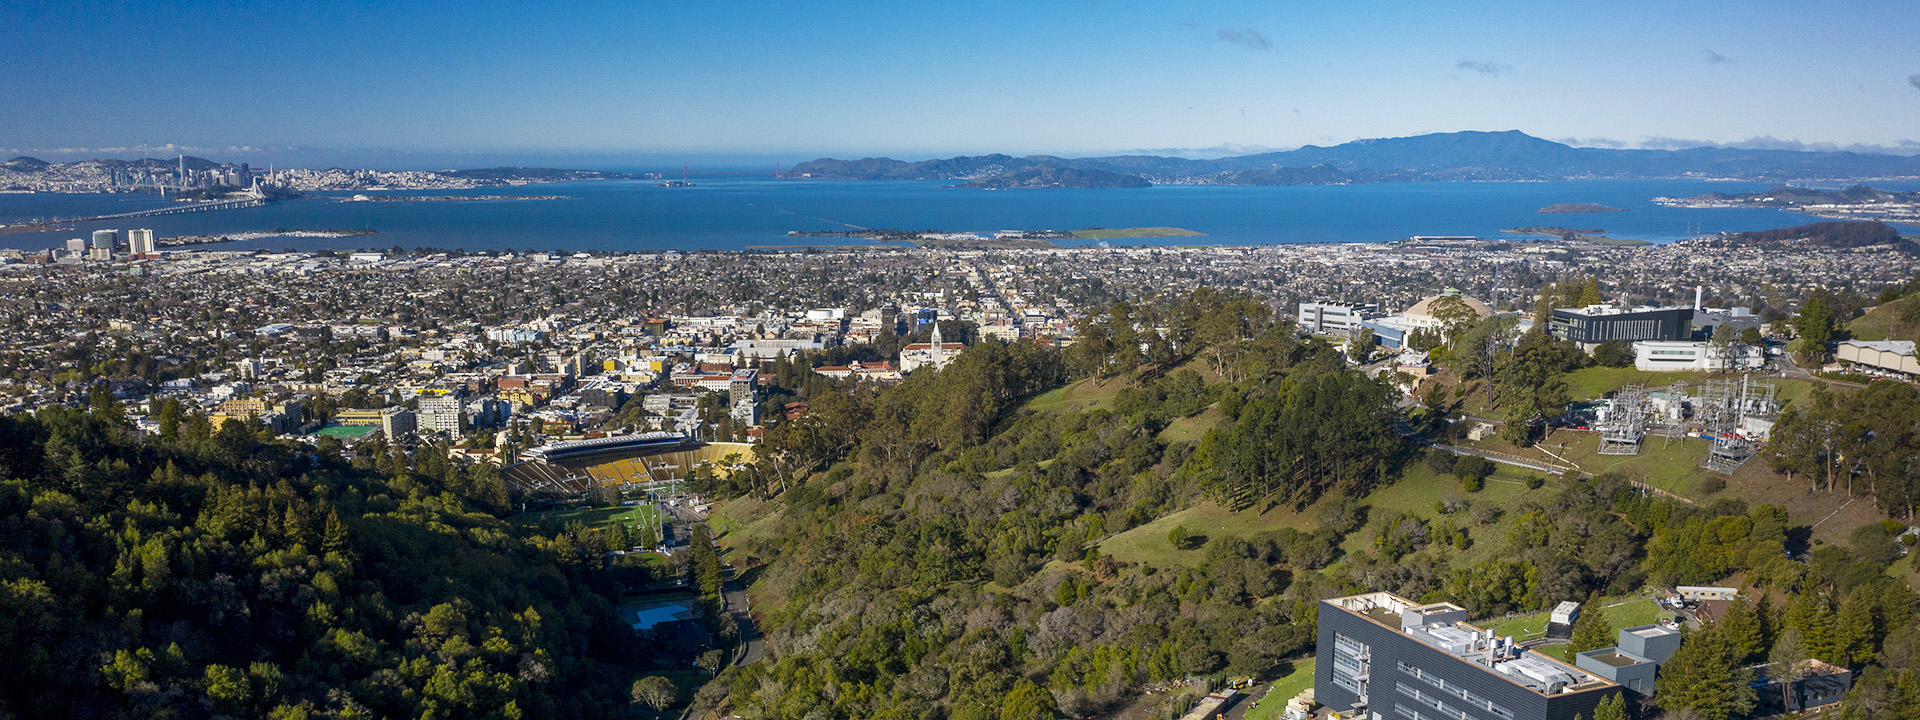 Aerial view overlooking Berkeley Lab with San Francisco Bay in the distance